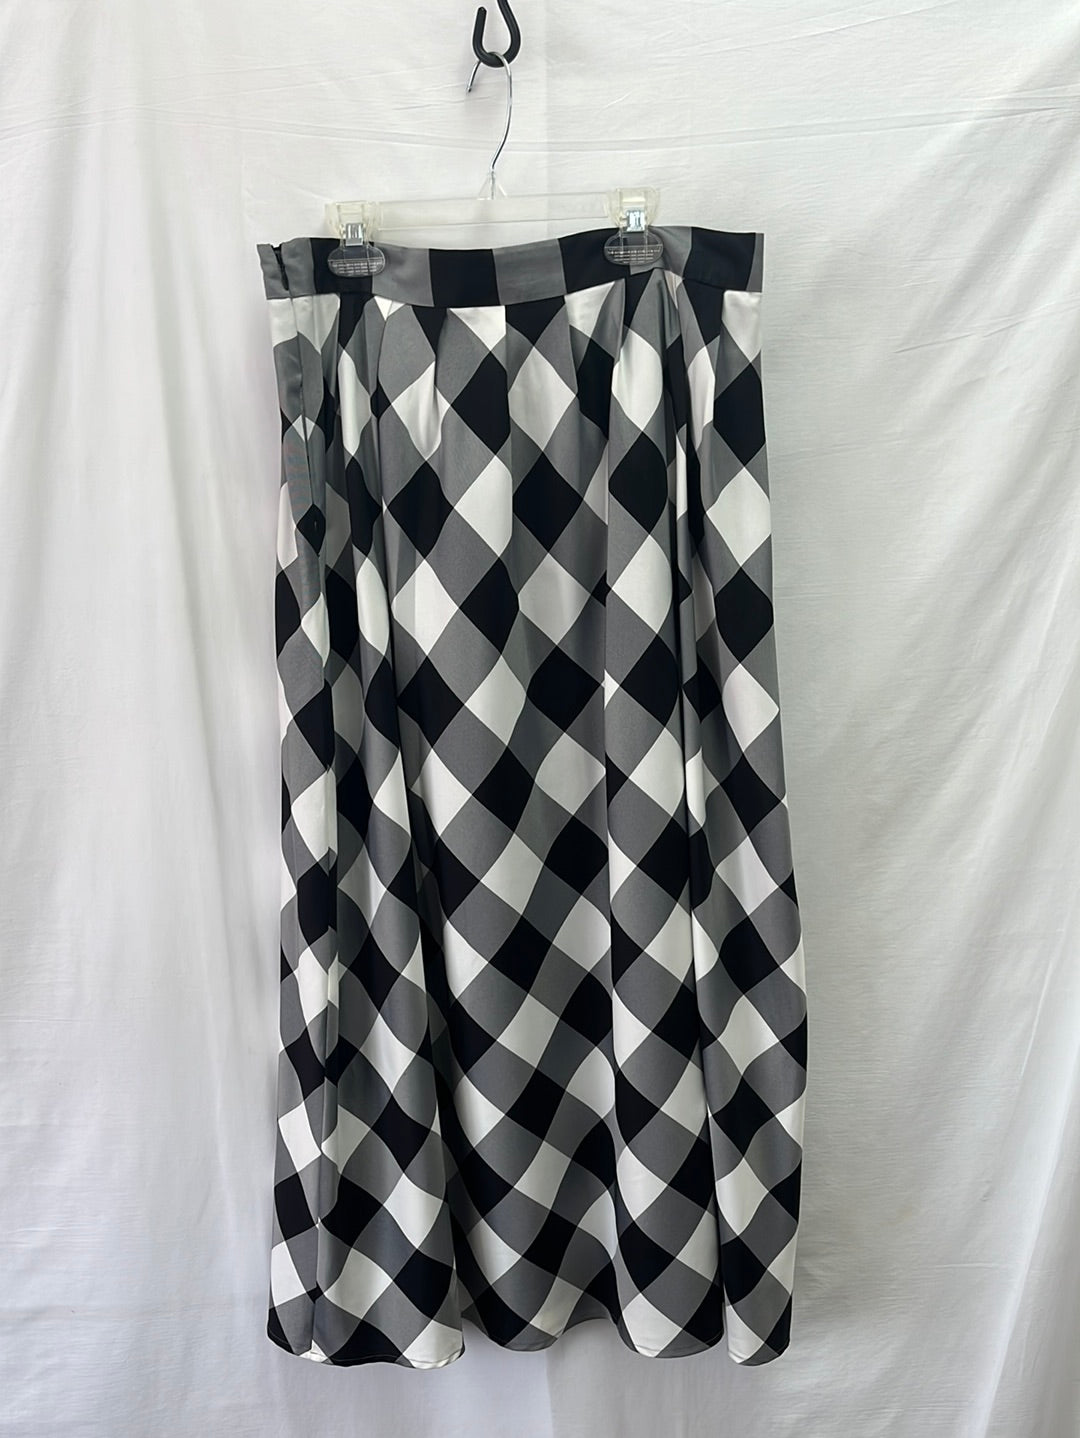 NWT -- TALBOTS Black and White Checked A-line Skirt -- Size: 12P